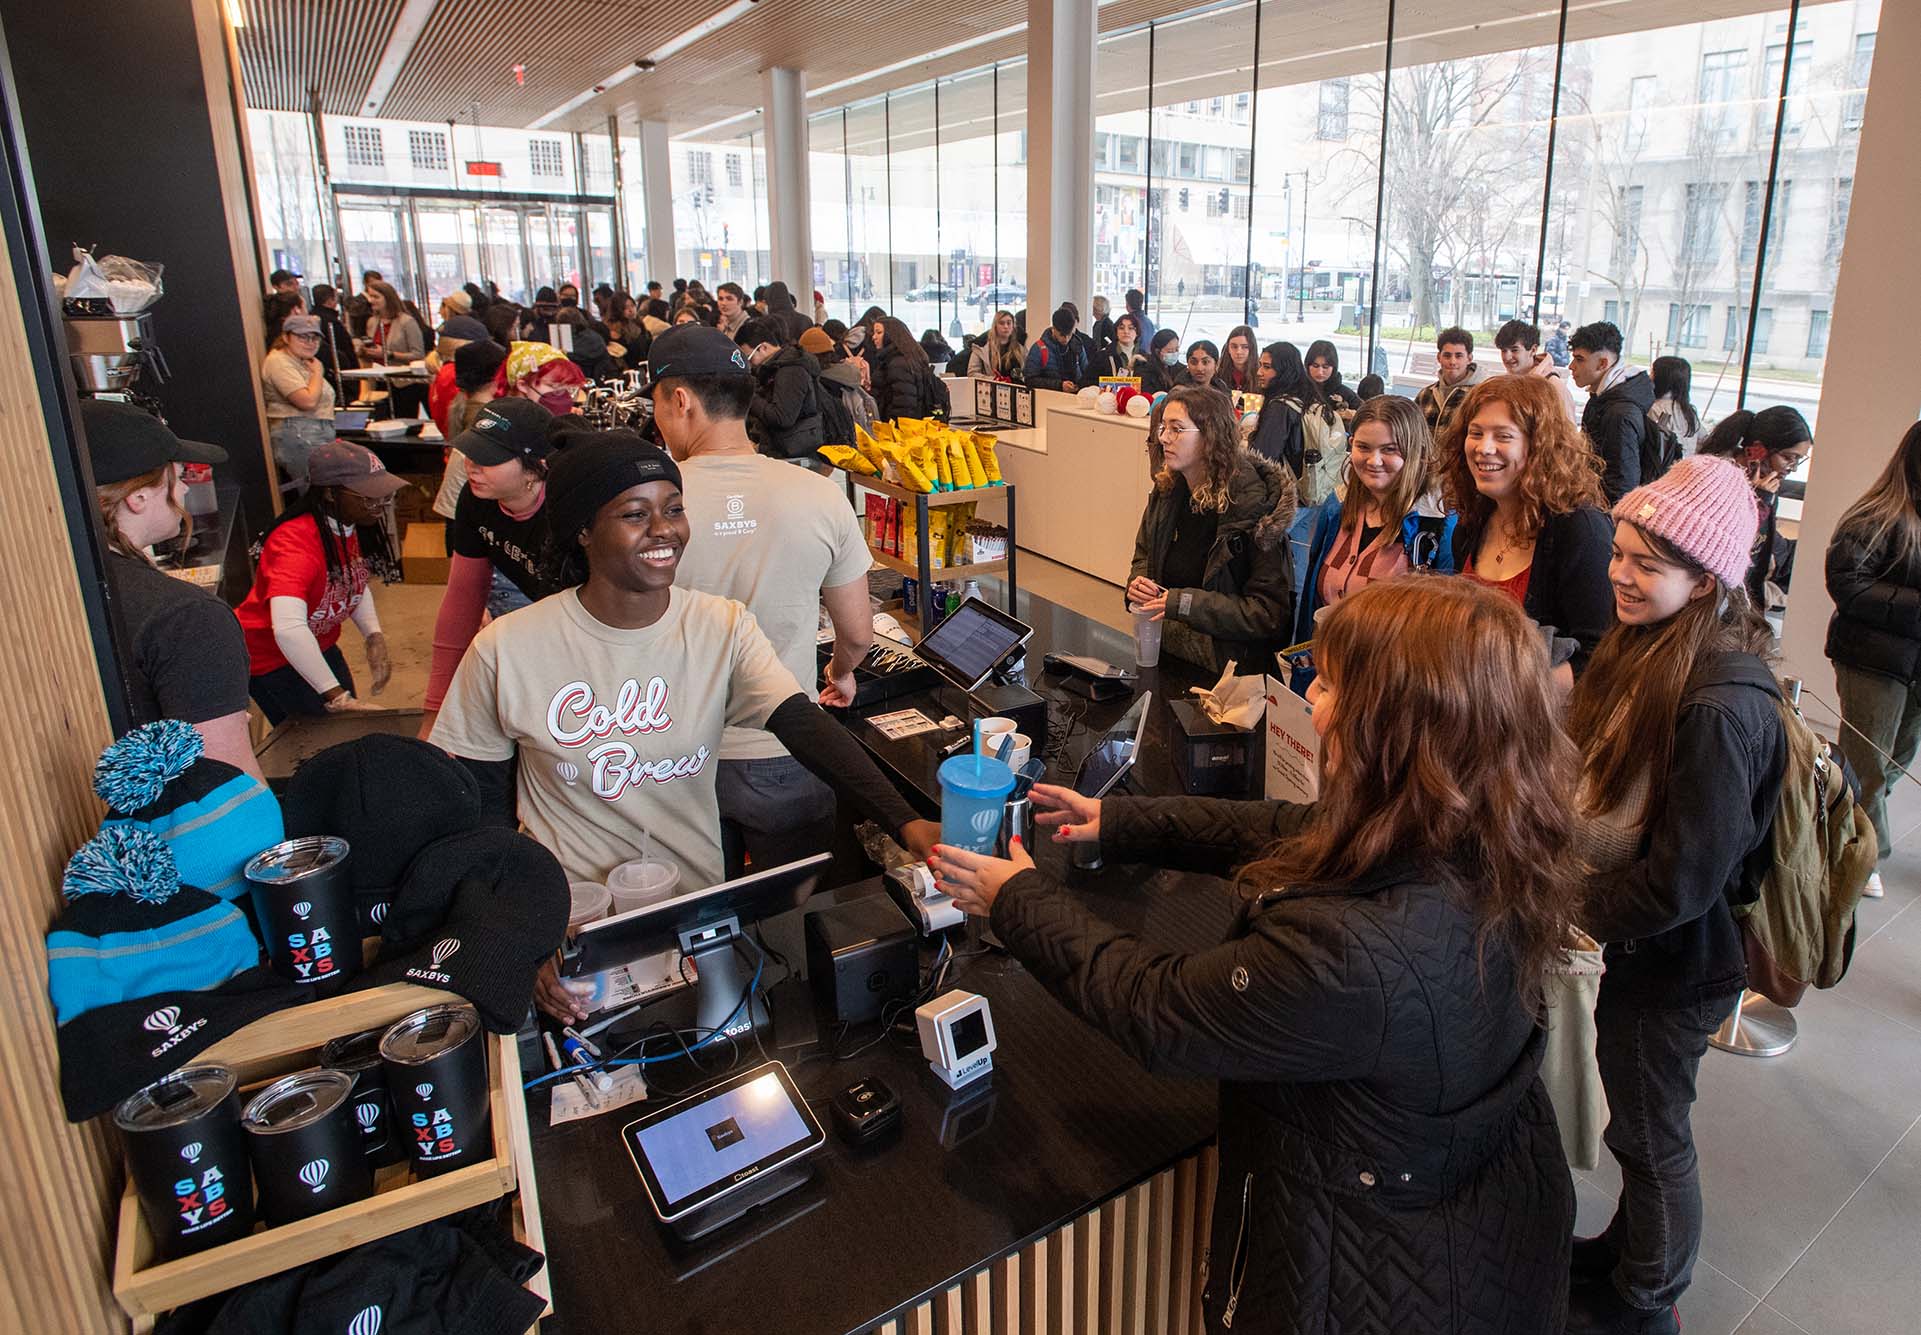 Photo: Malaika Uriesi (CGS’25) at left, hands out free cups at Saxby’s in the Center for Computing & Data Sciences on opening day January 19. A young Black woman wearing a gray Saxby's shirt hands out a drink behind a coffee bar counter. A large crowd is seen around the counter.